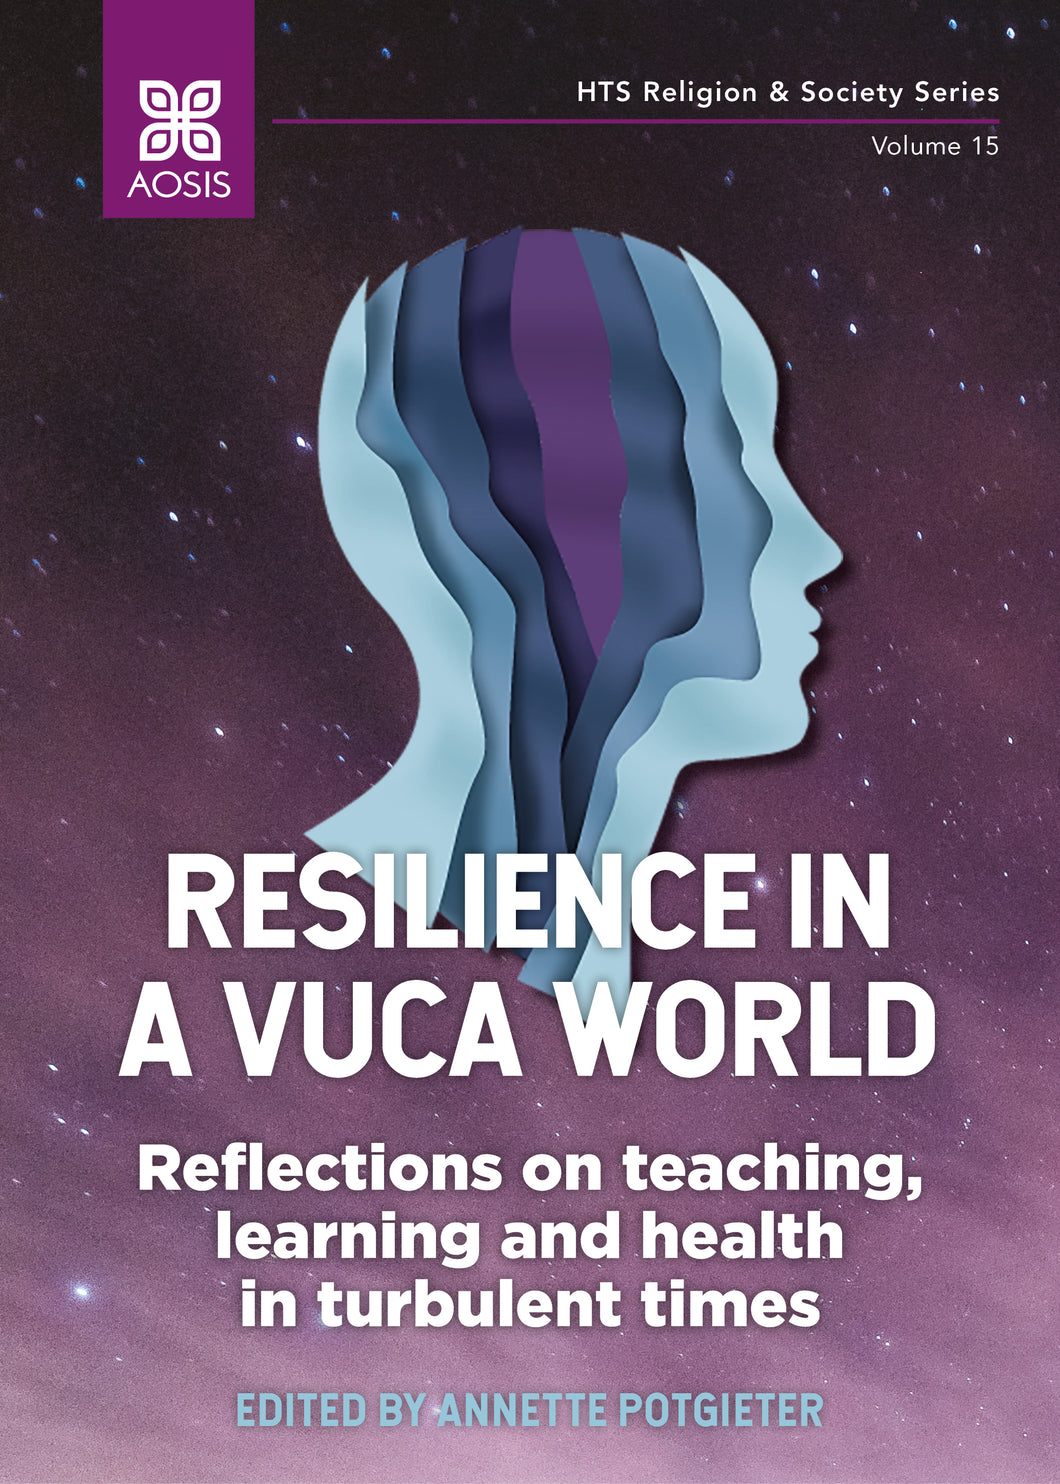 Resilience in a VUCA world: Reflections on teaching, learning and health in turbulent times